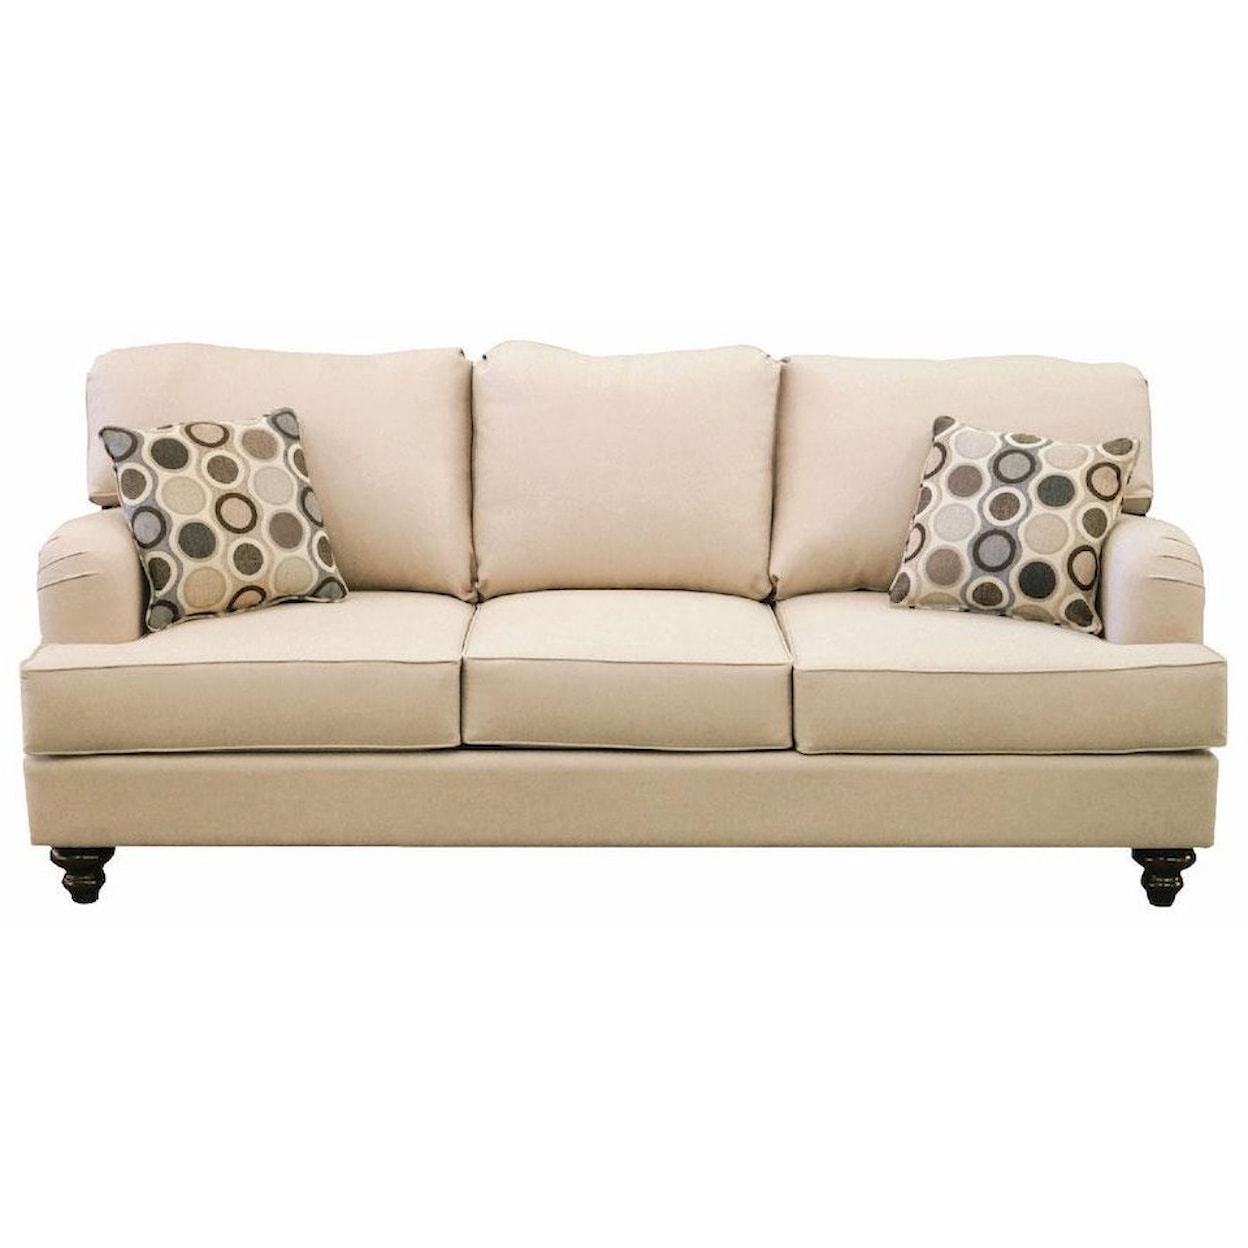 Sussex Upholstery Co. Charlotte Charlotte 3 Cushion Sofa